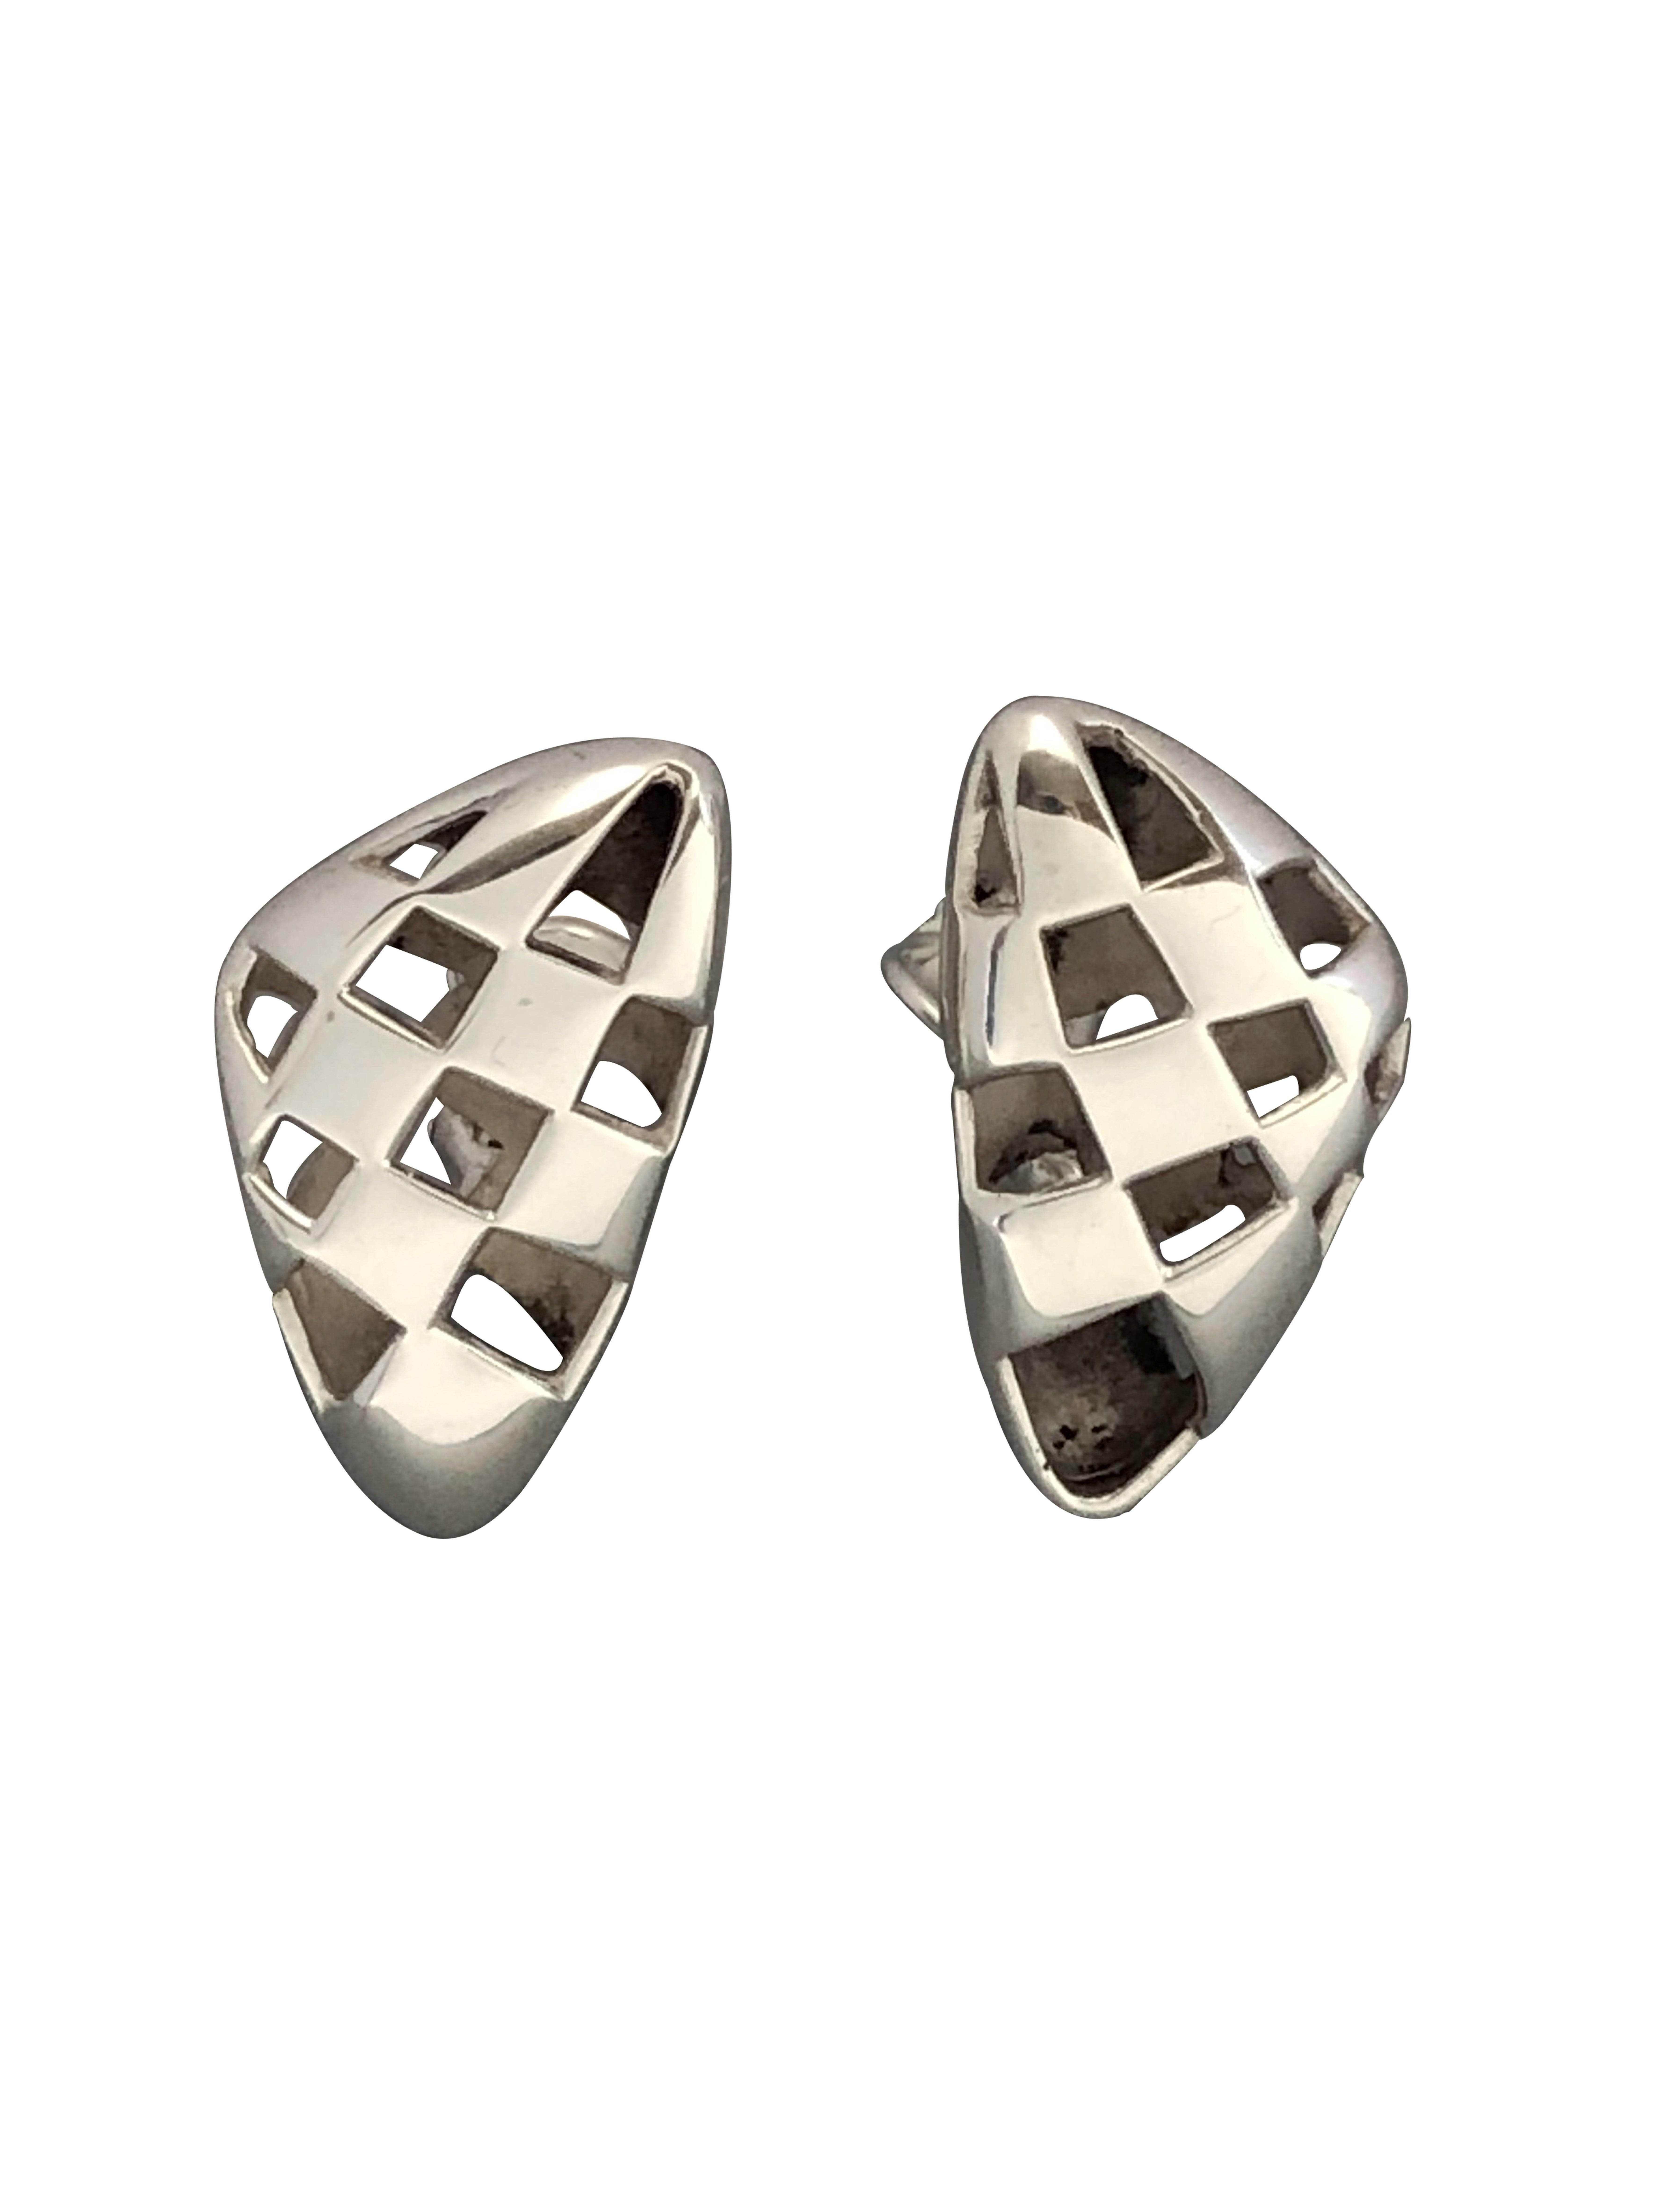 Circa 1980s Angela Cummings Sterling Silver large Basket Weave style Earrings, these measure 1 3/8 X 3/4 inch and 3/8 inch thick. Omega clip backs with a post, excellent and unworn condition in the original Cummings felt pouch. 